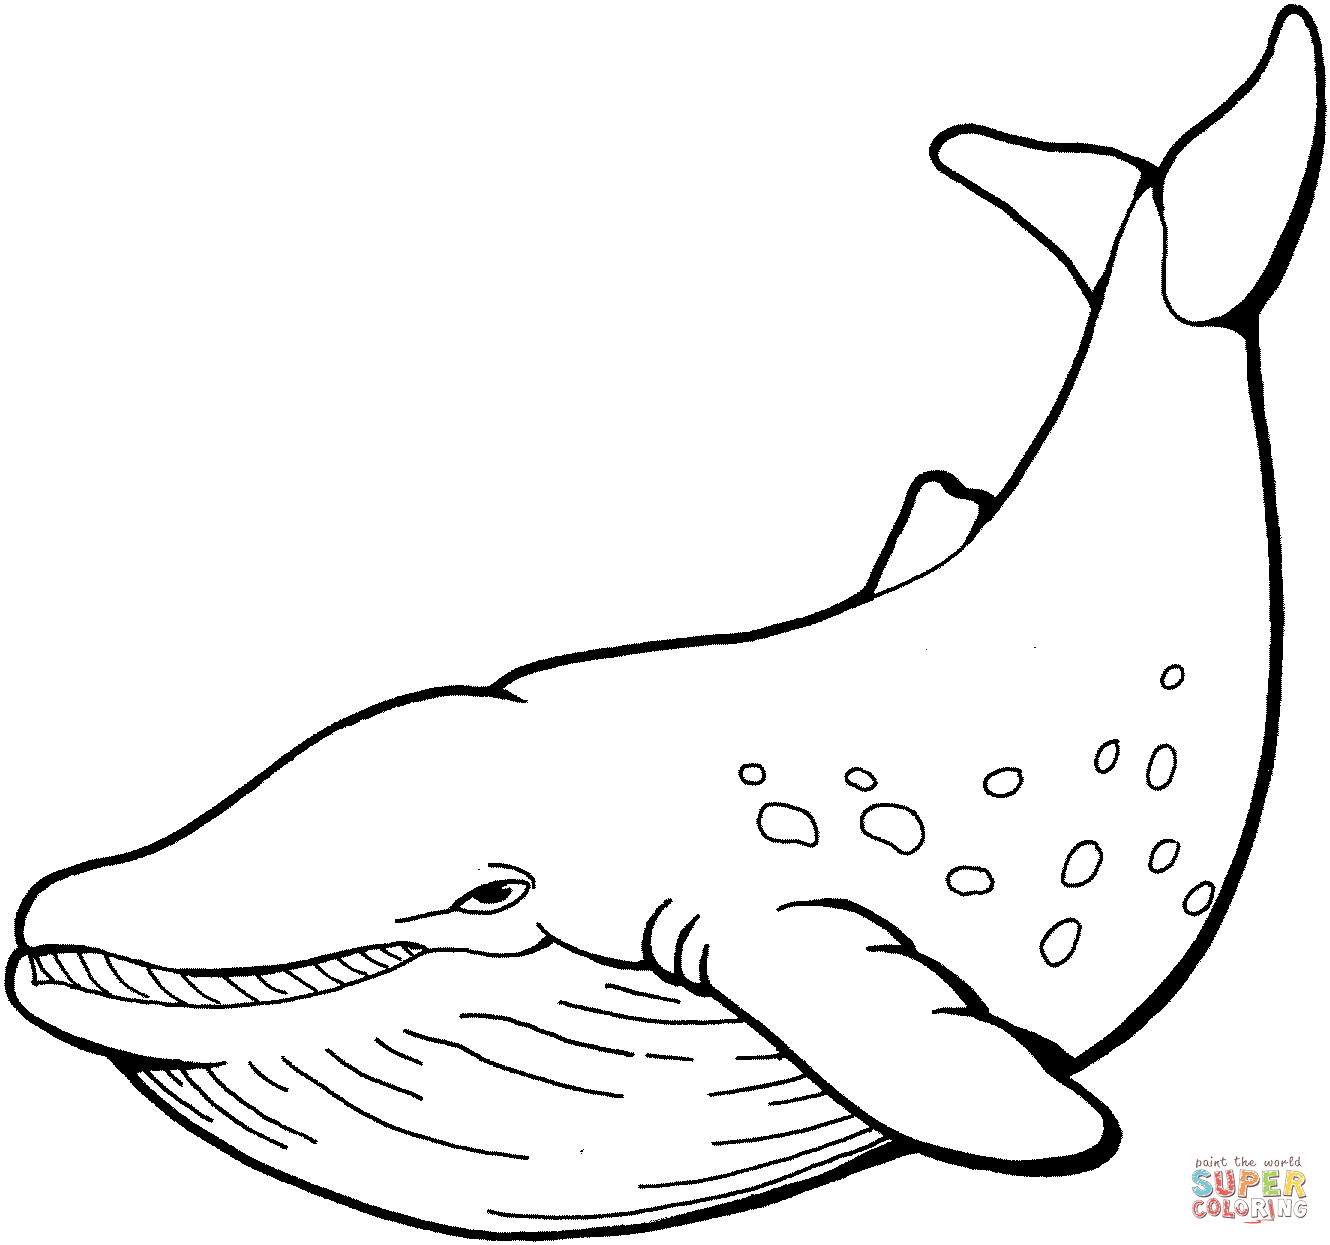 Simple Cartoon Sperm Whale coloring page | Free Printable Coloring ...